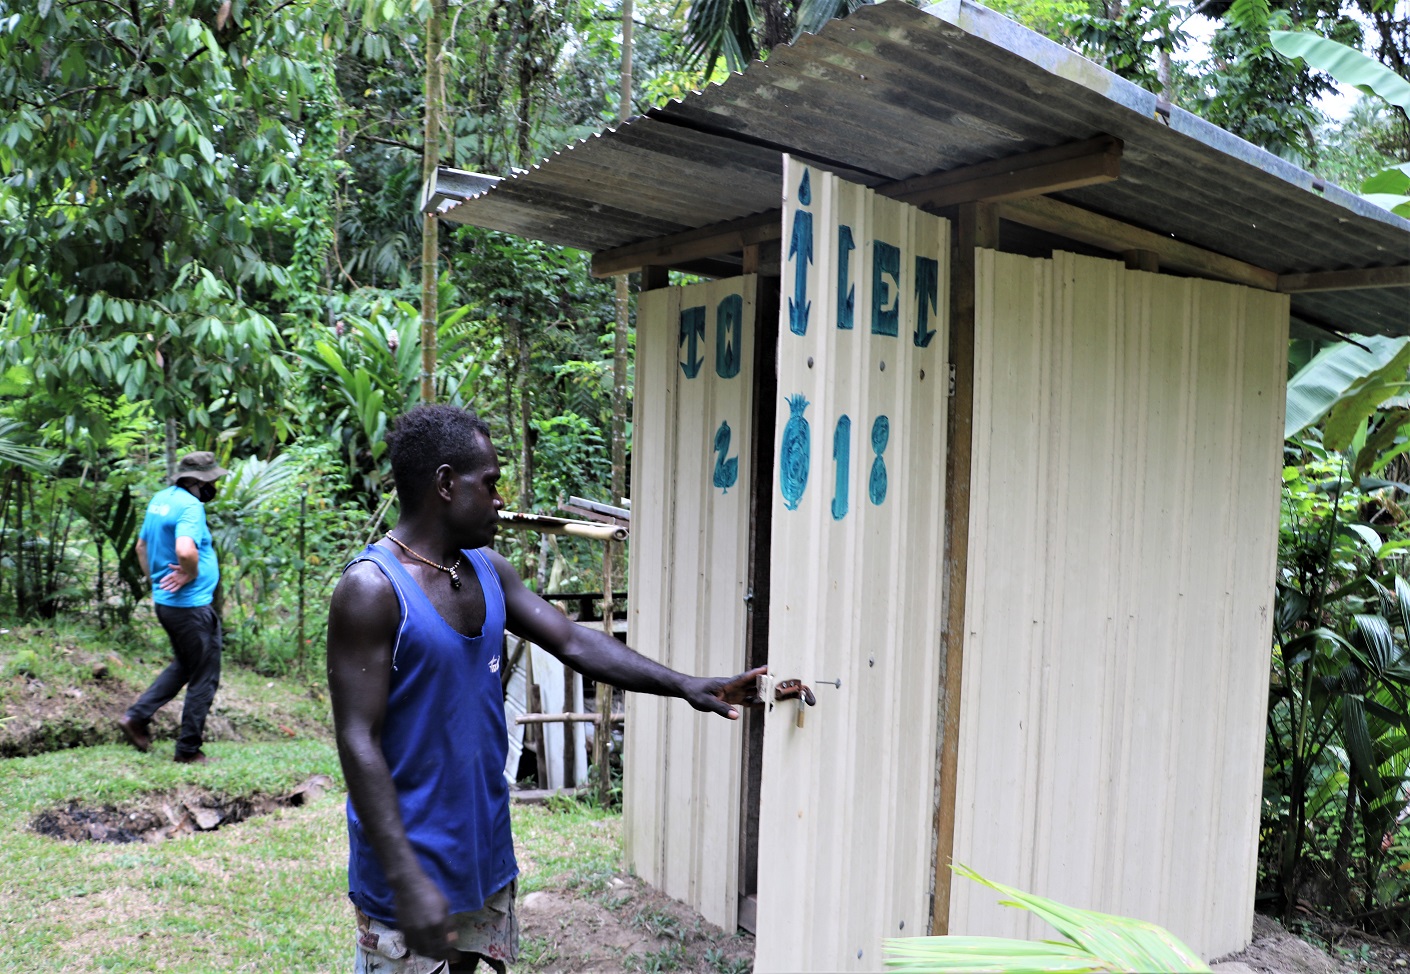 Community Led Total Sanitation is key in addressing Open defecation in communities (4)